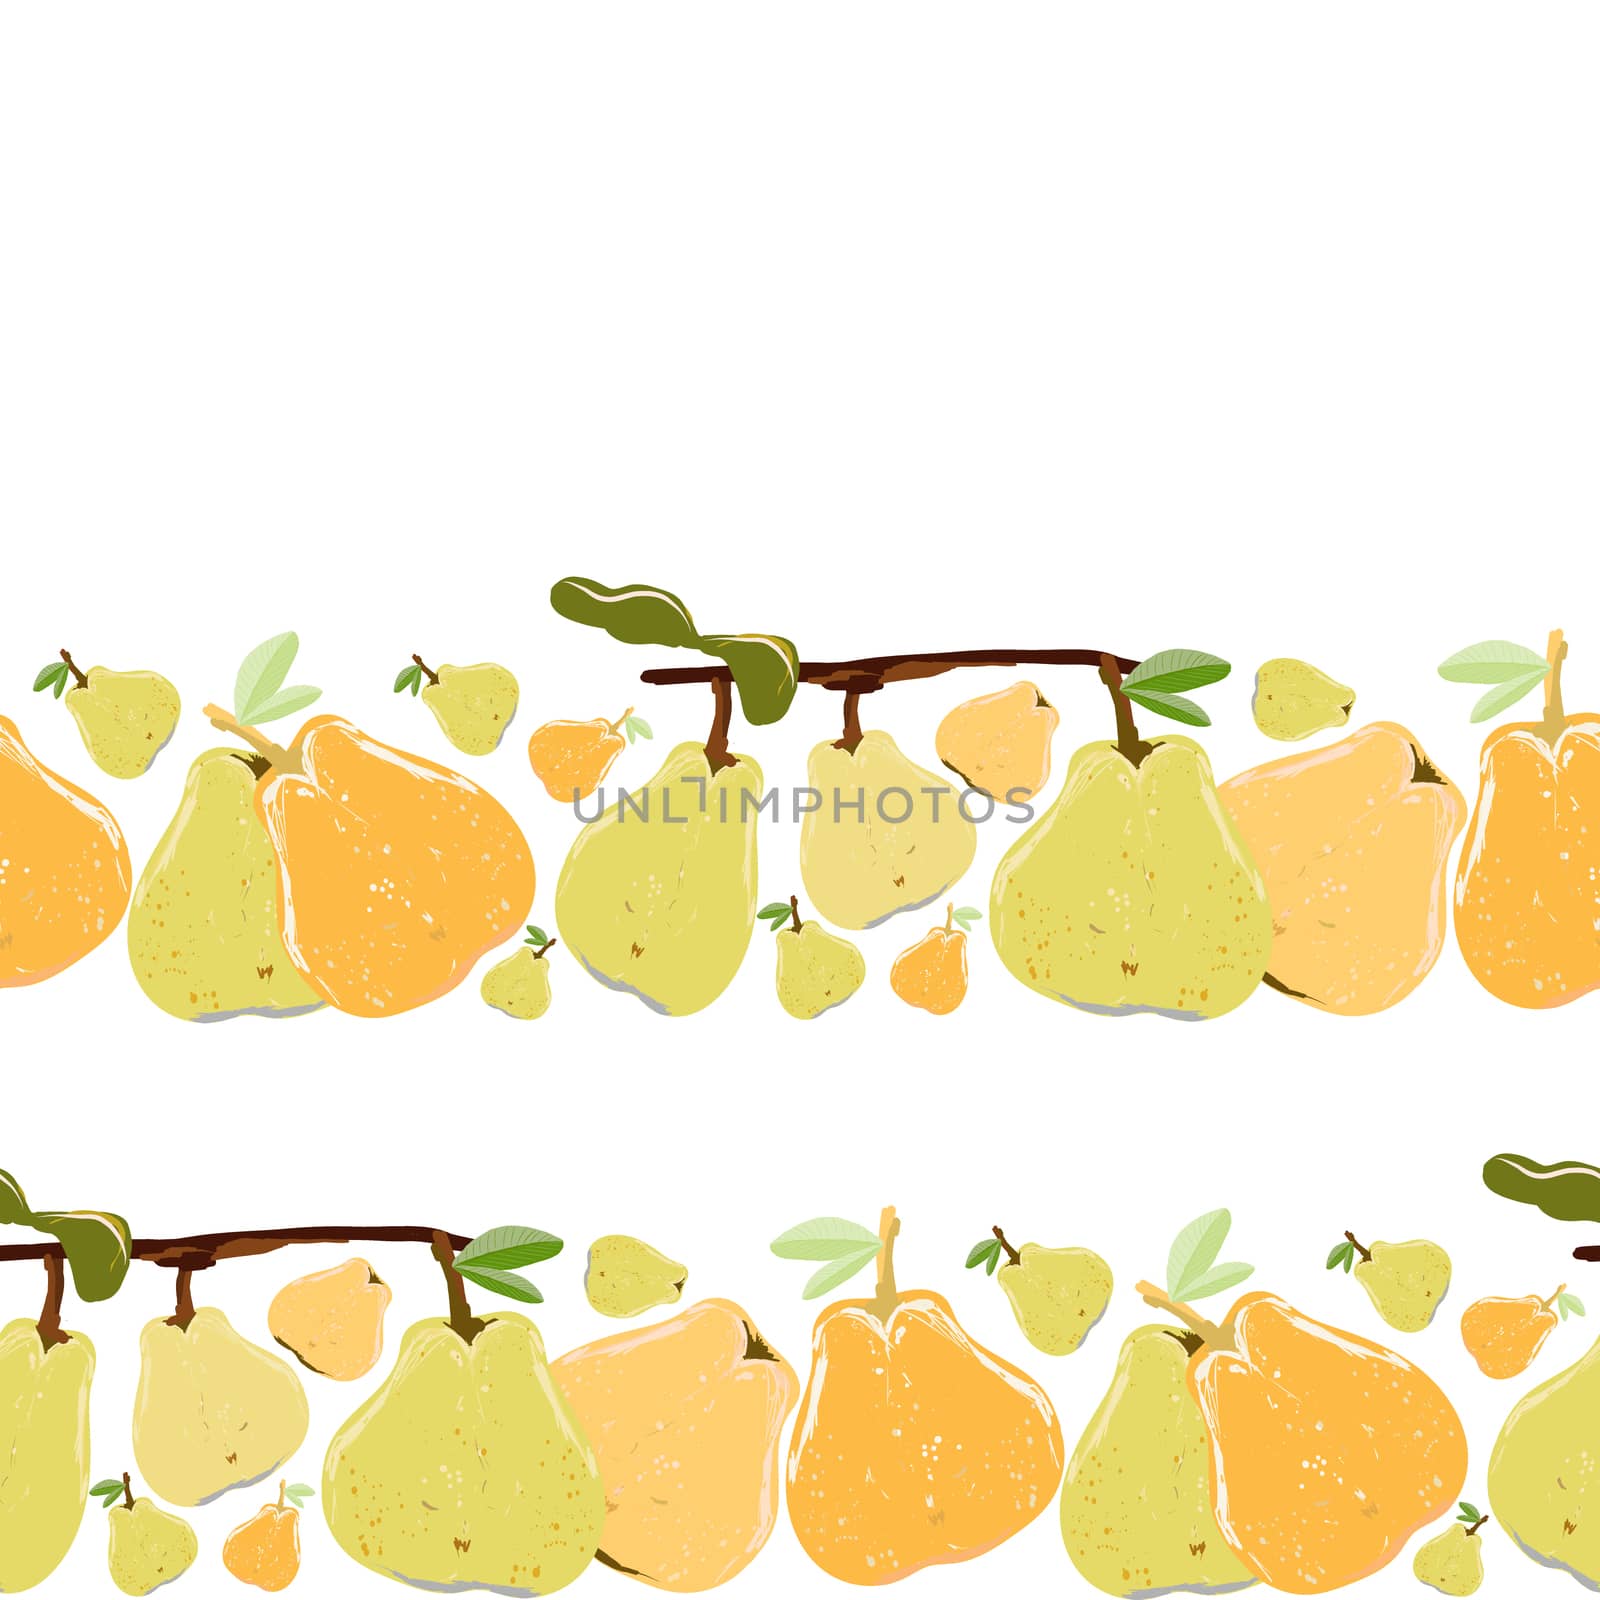 Yellow and orange pears whole with leaves seamless horizontal border on white background. Juicy design set for design, banner, menu, poster, apparel, cards.